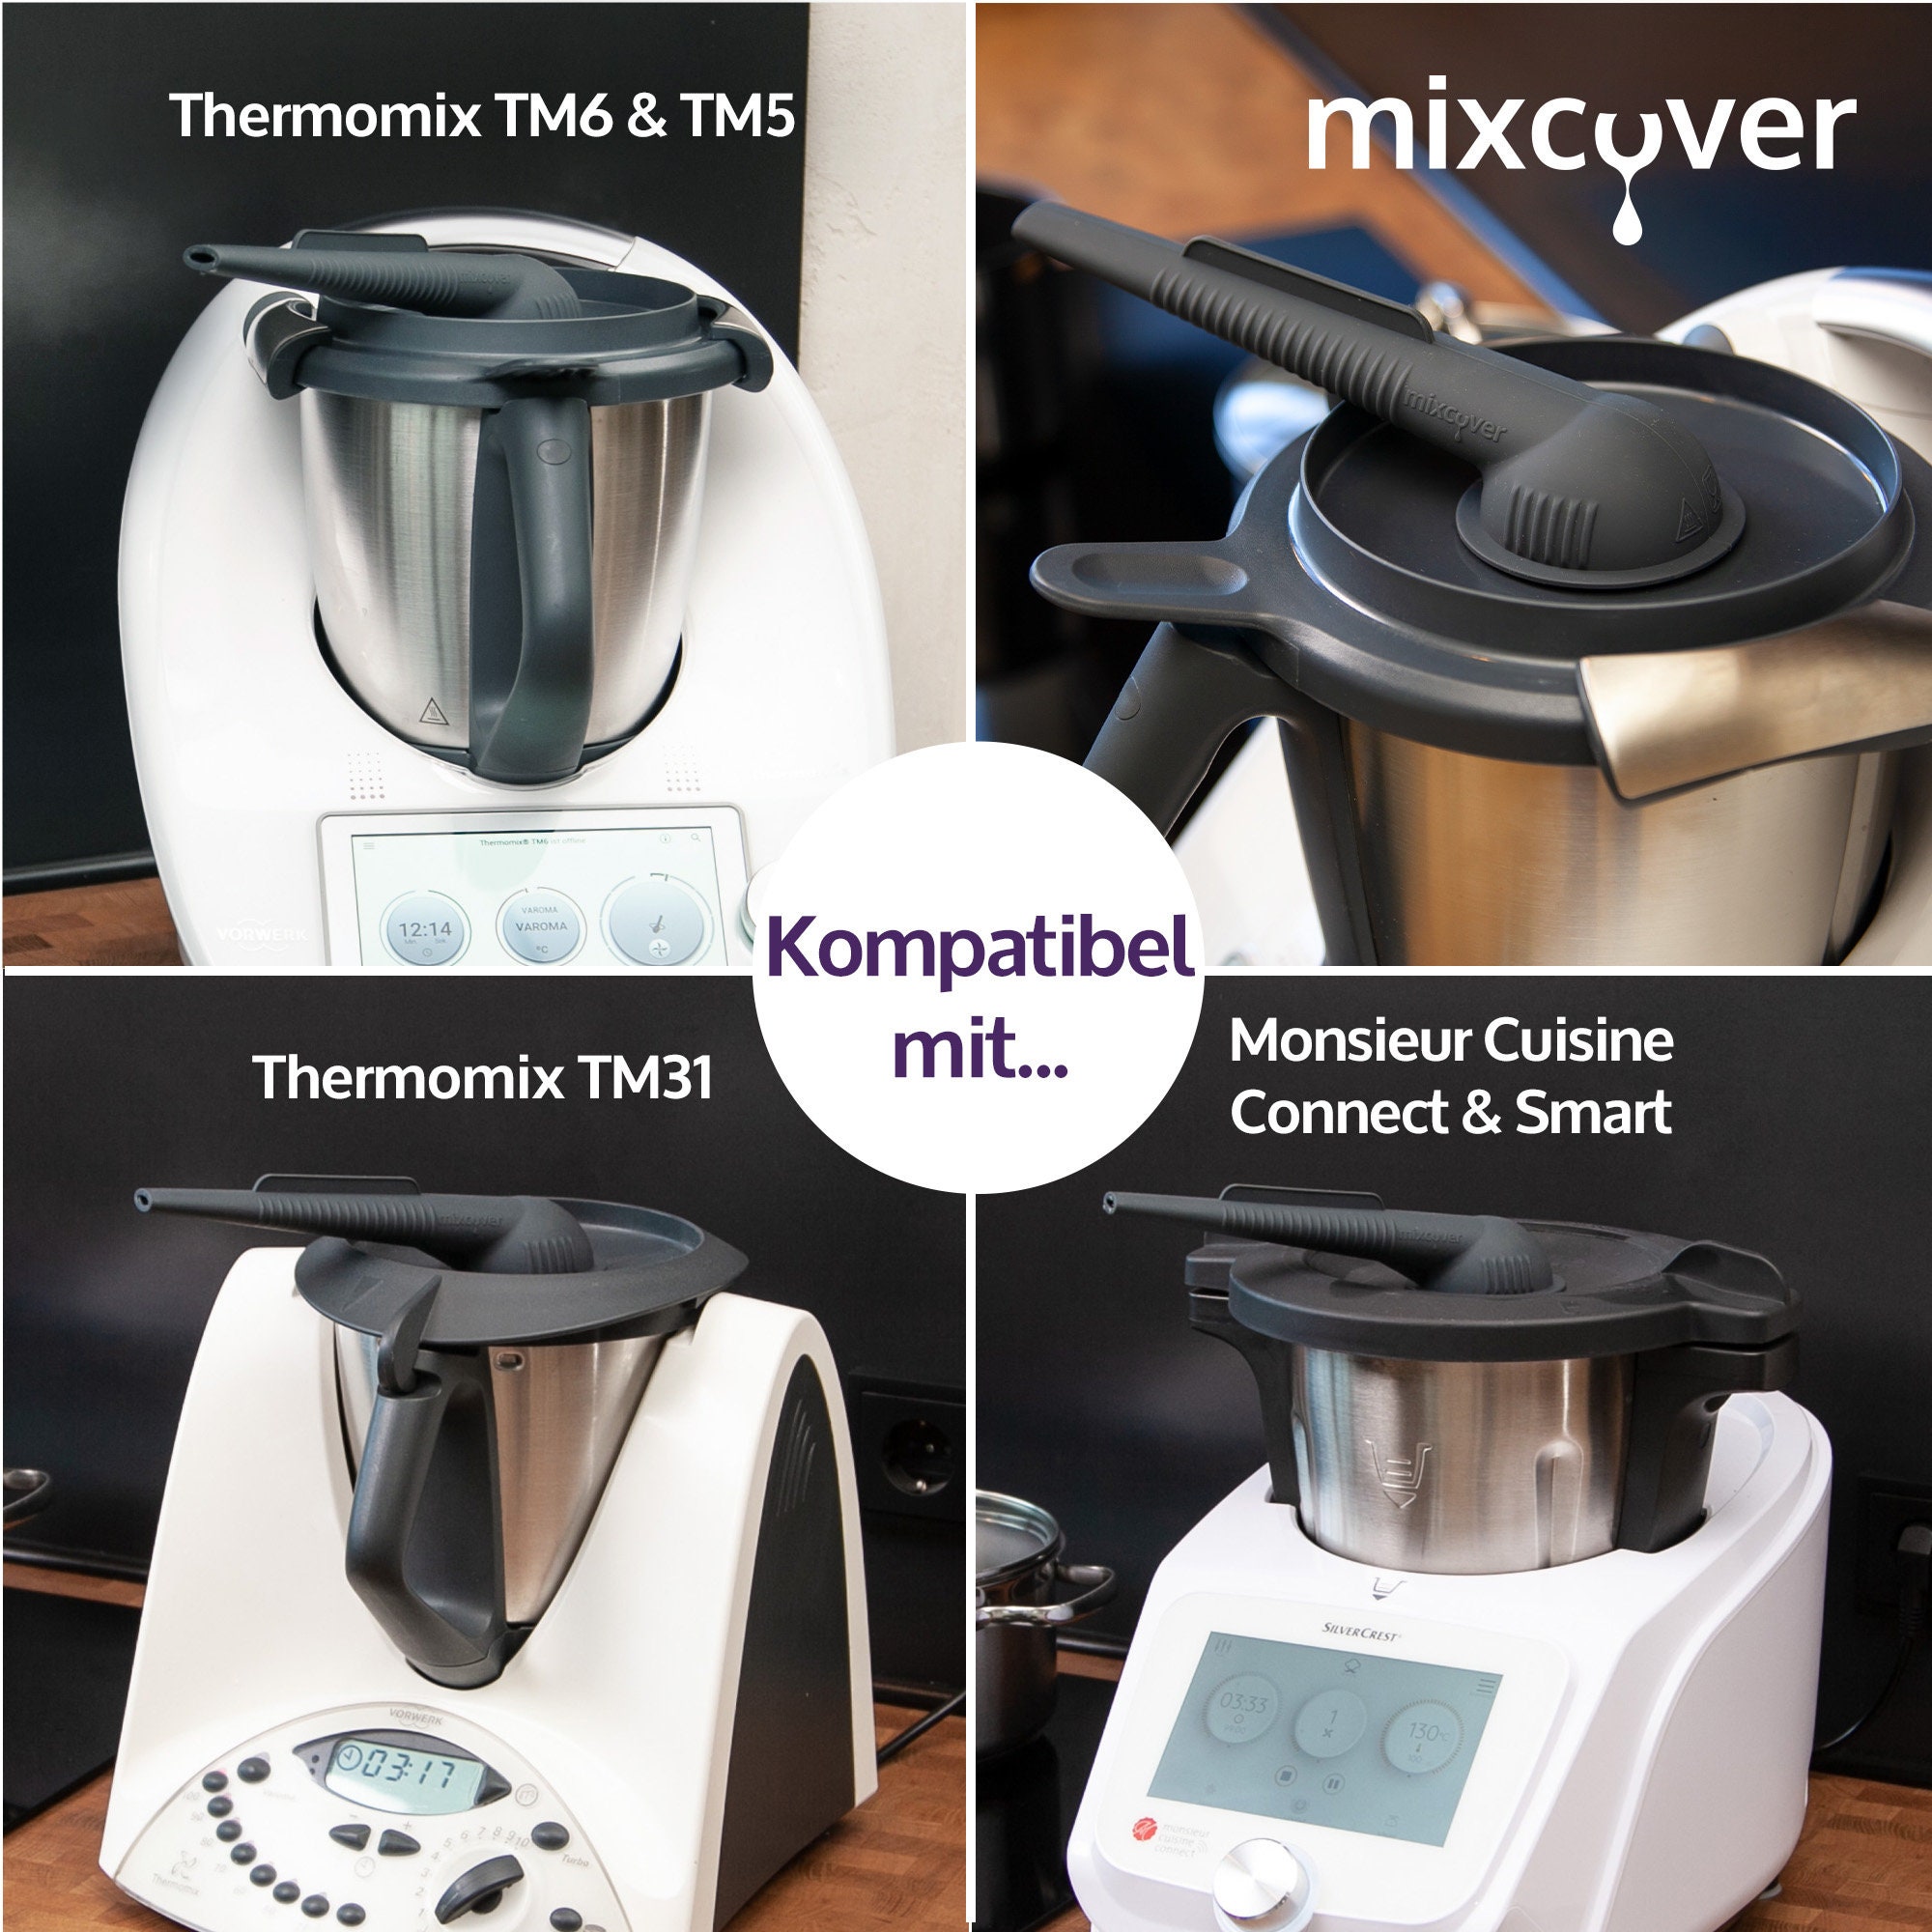 Mixcover cooking chamber divider (HALF) for Thermomix Varoma steam cooking  chamber - to divide the cooking chamber, steam cooking divider compatible